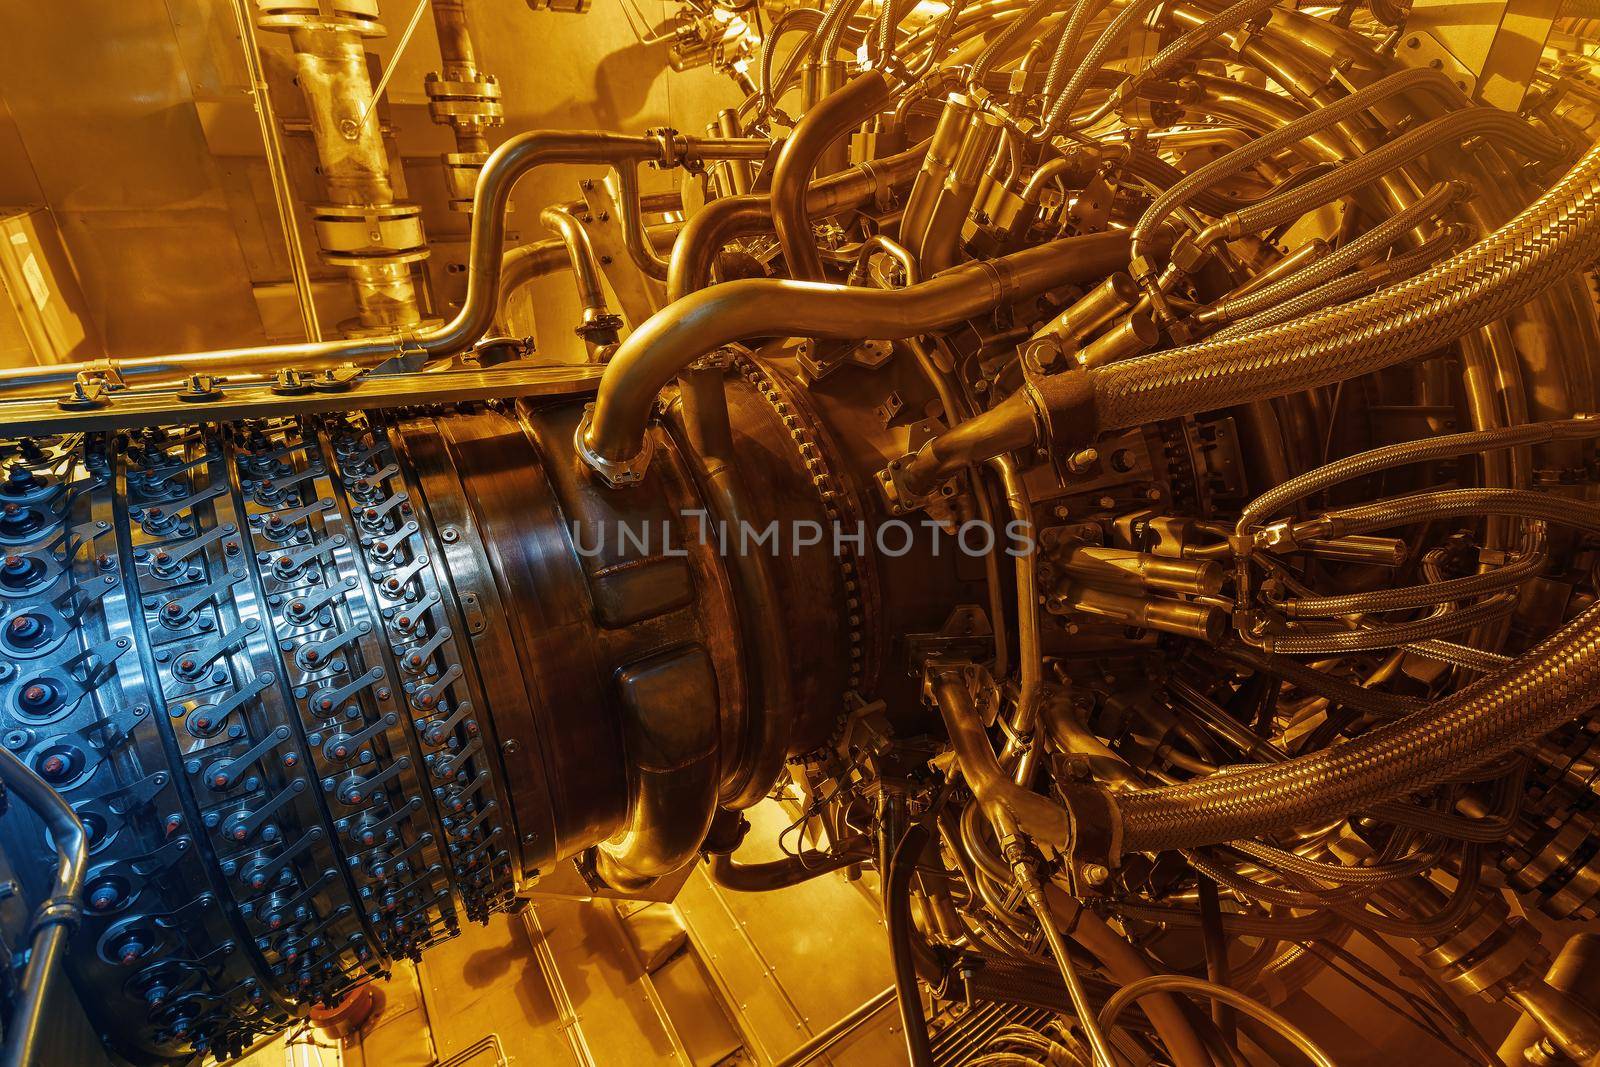 Gas turbine engine of feed gas compressor located inside pressurized enclosure, The gas turbine engine used in offshore oil and gas central processing platform. by AlexGrec